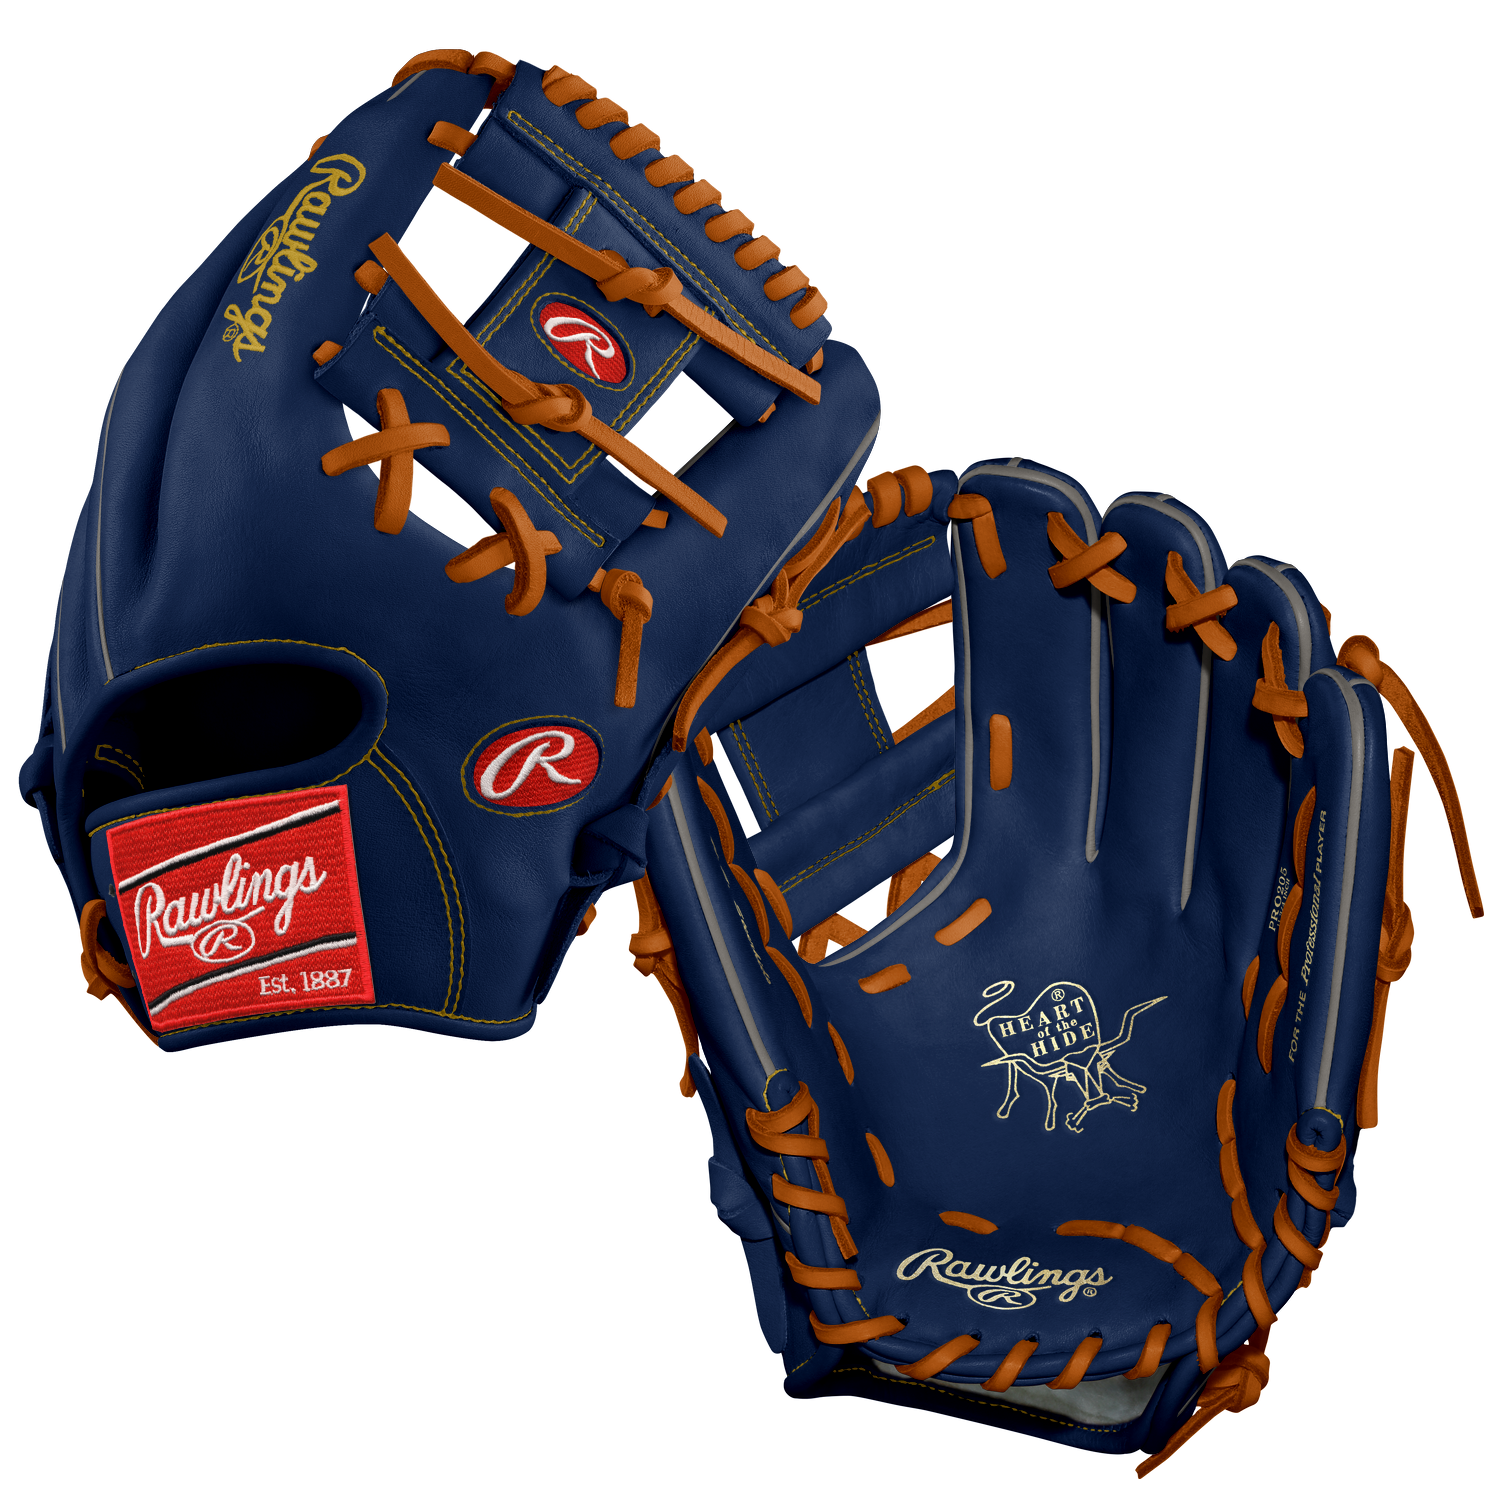       The Rawlings Heart of the Hide PRO205-2 glove with I-Web in the 200 pattern is a true gem for baseball enthusiasts. With its deep pocket and 11.75-inch size, this glove caters to the needs of infielders who value a longer glove for extended reach and exceptional control. Crafted with precision and expertise, the Heart of the Hide series ensures superior durability and performance, thanks to its top-grain leather construction.  Pattern 205 Sport Baseball Leather Heart of the Hide Fit Standard Throwing Hand Right-Hand Throw Position Infield Size 11 3/4 Pro I Web Logo Patch White on Scarlet Shell Back Royal Shell Palm Royal Laces Tan Standard Lining Royal Shell Palm Color Welting Palm Split Gray Welting Back Split Gray Binding Royal Stitching Vegas Gold Stamping Gold Finger Pad No Finger Hood No Palm Pad No Heel Pad Full Wrist Lining BOA Sweatband No Break-In Standard       